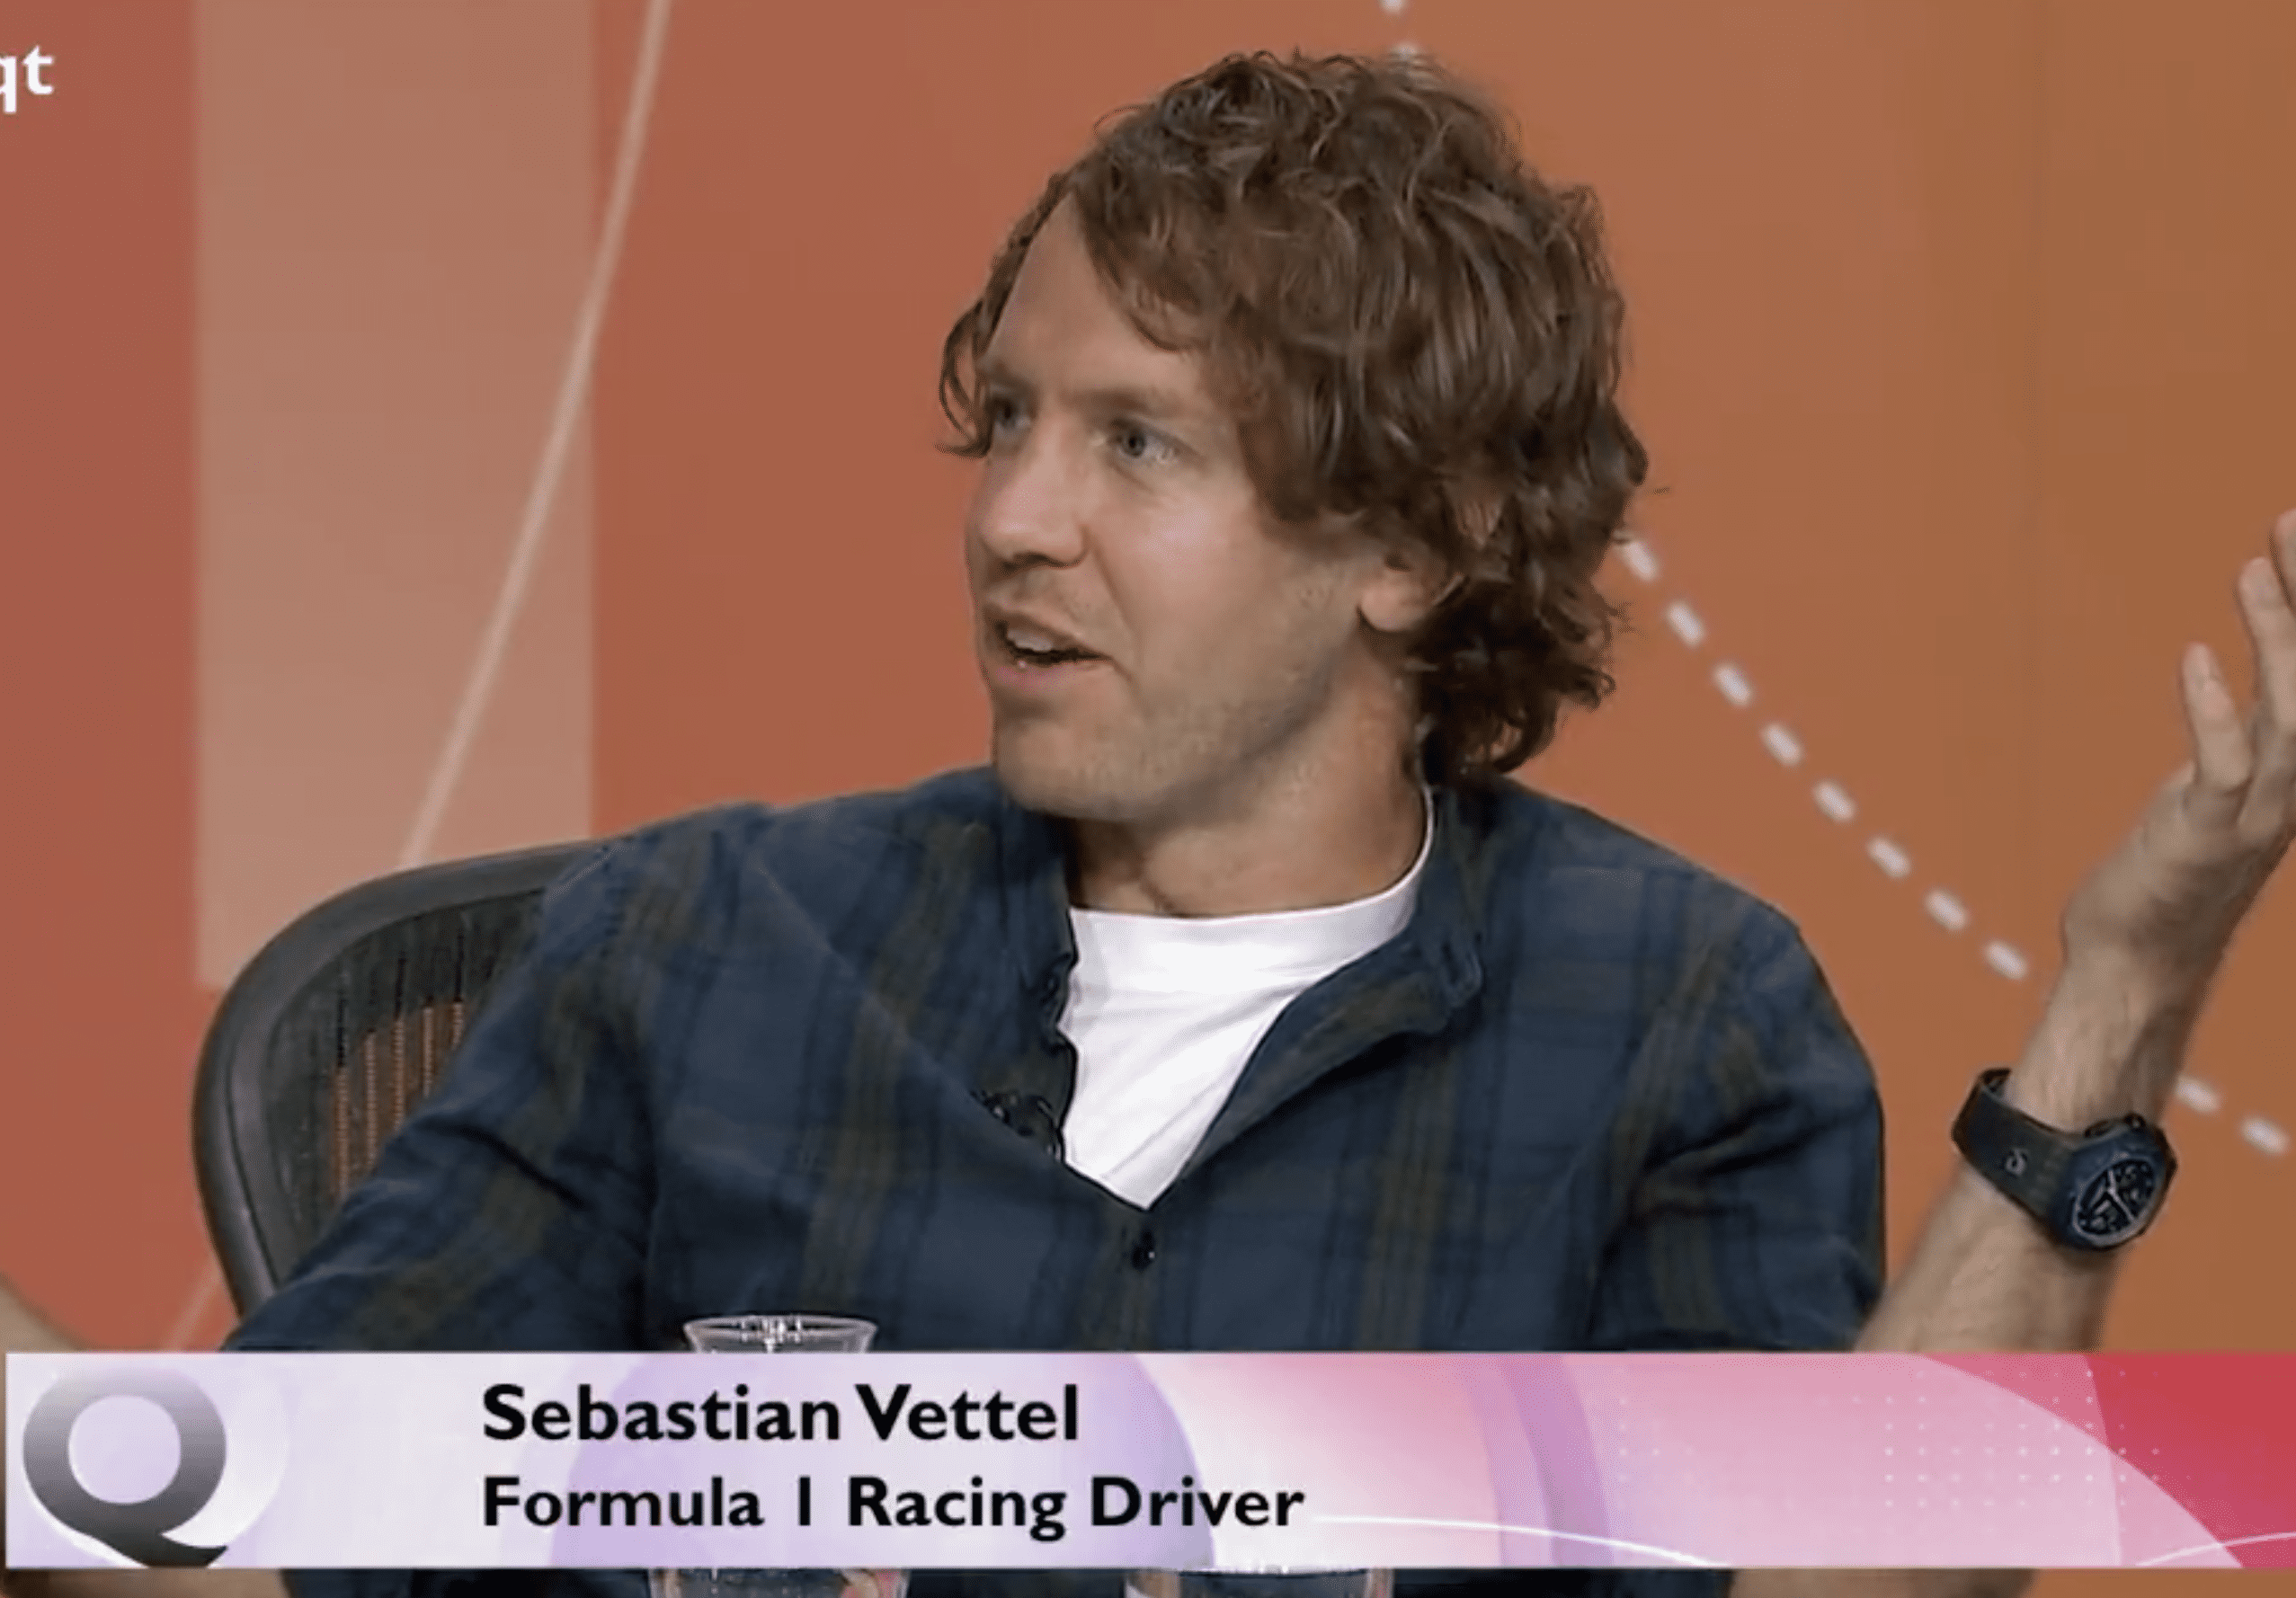 F1 driver Sebastian Vettel’s comment on Brexit is worth putting brakes on for